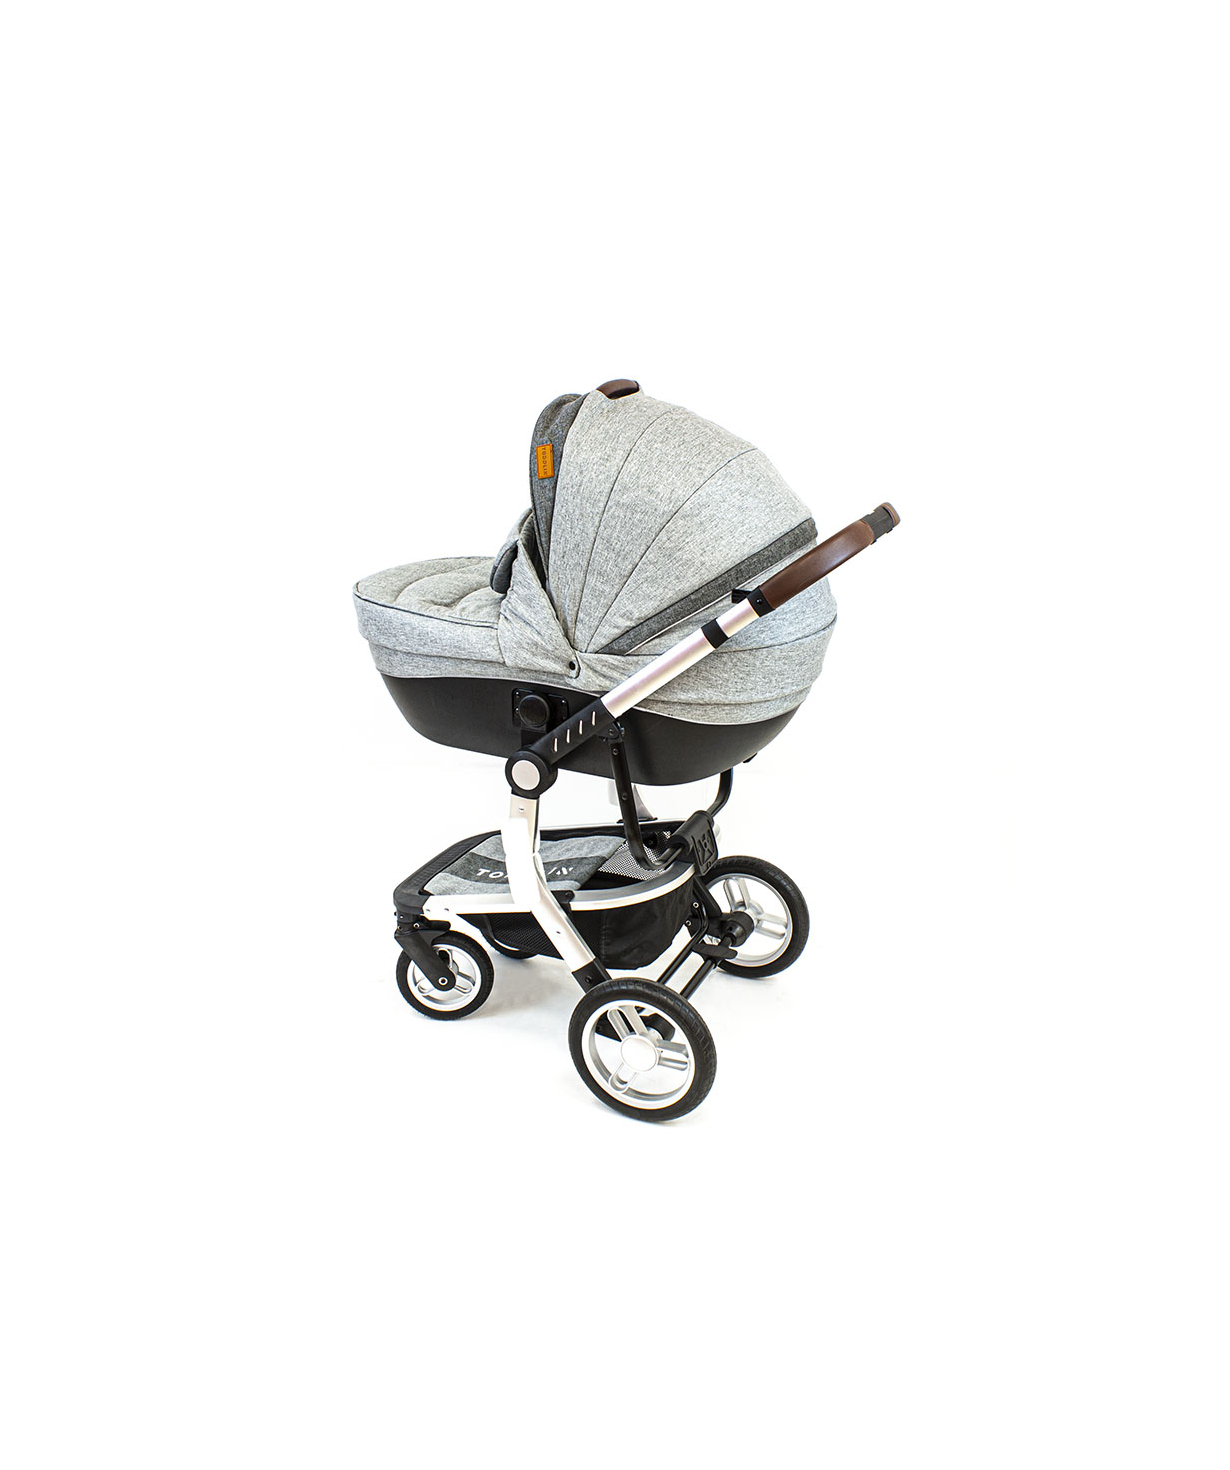 Baby carriage TK001